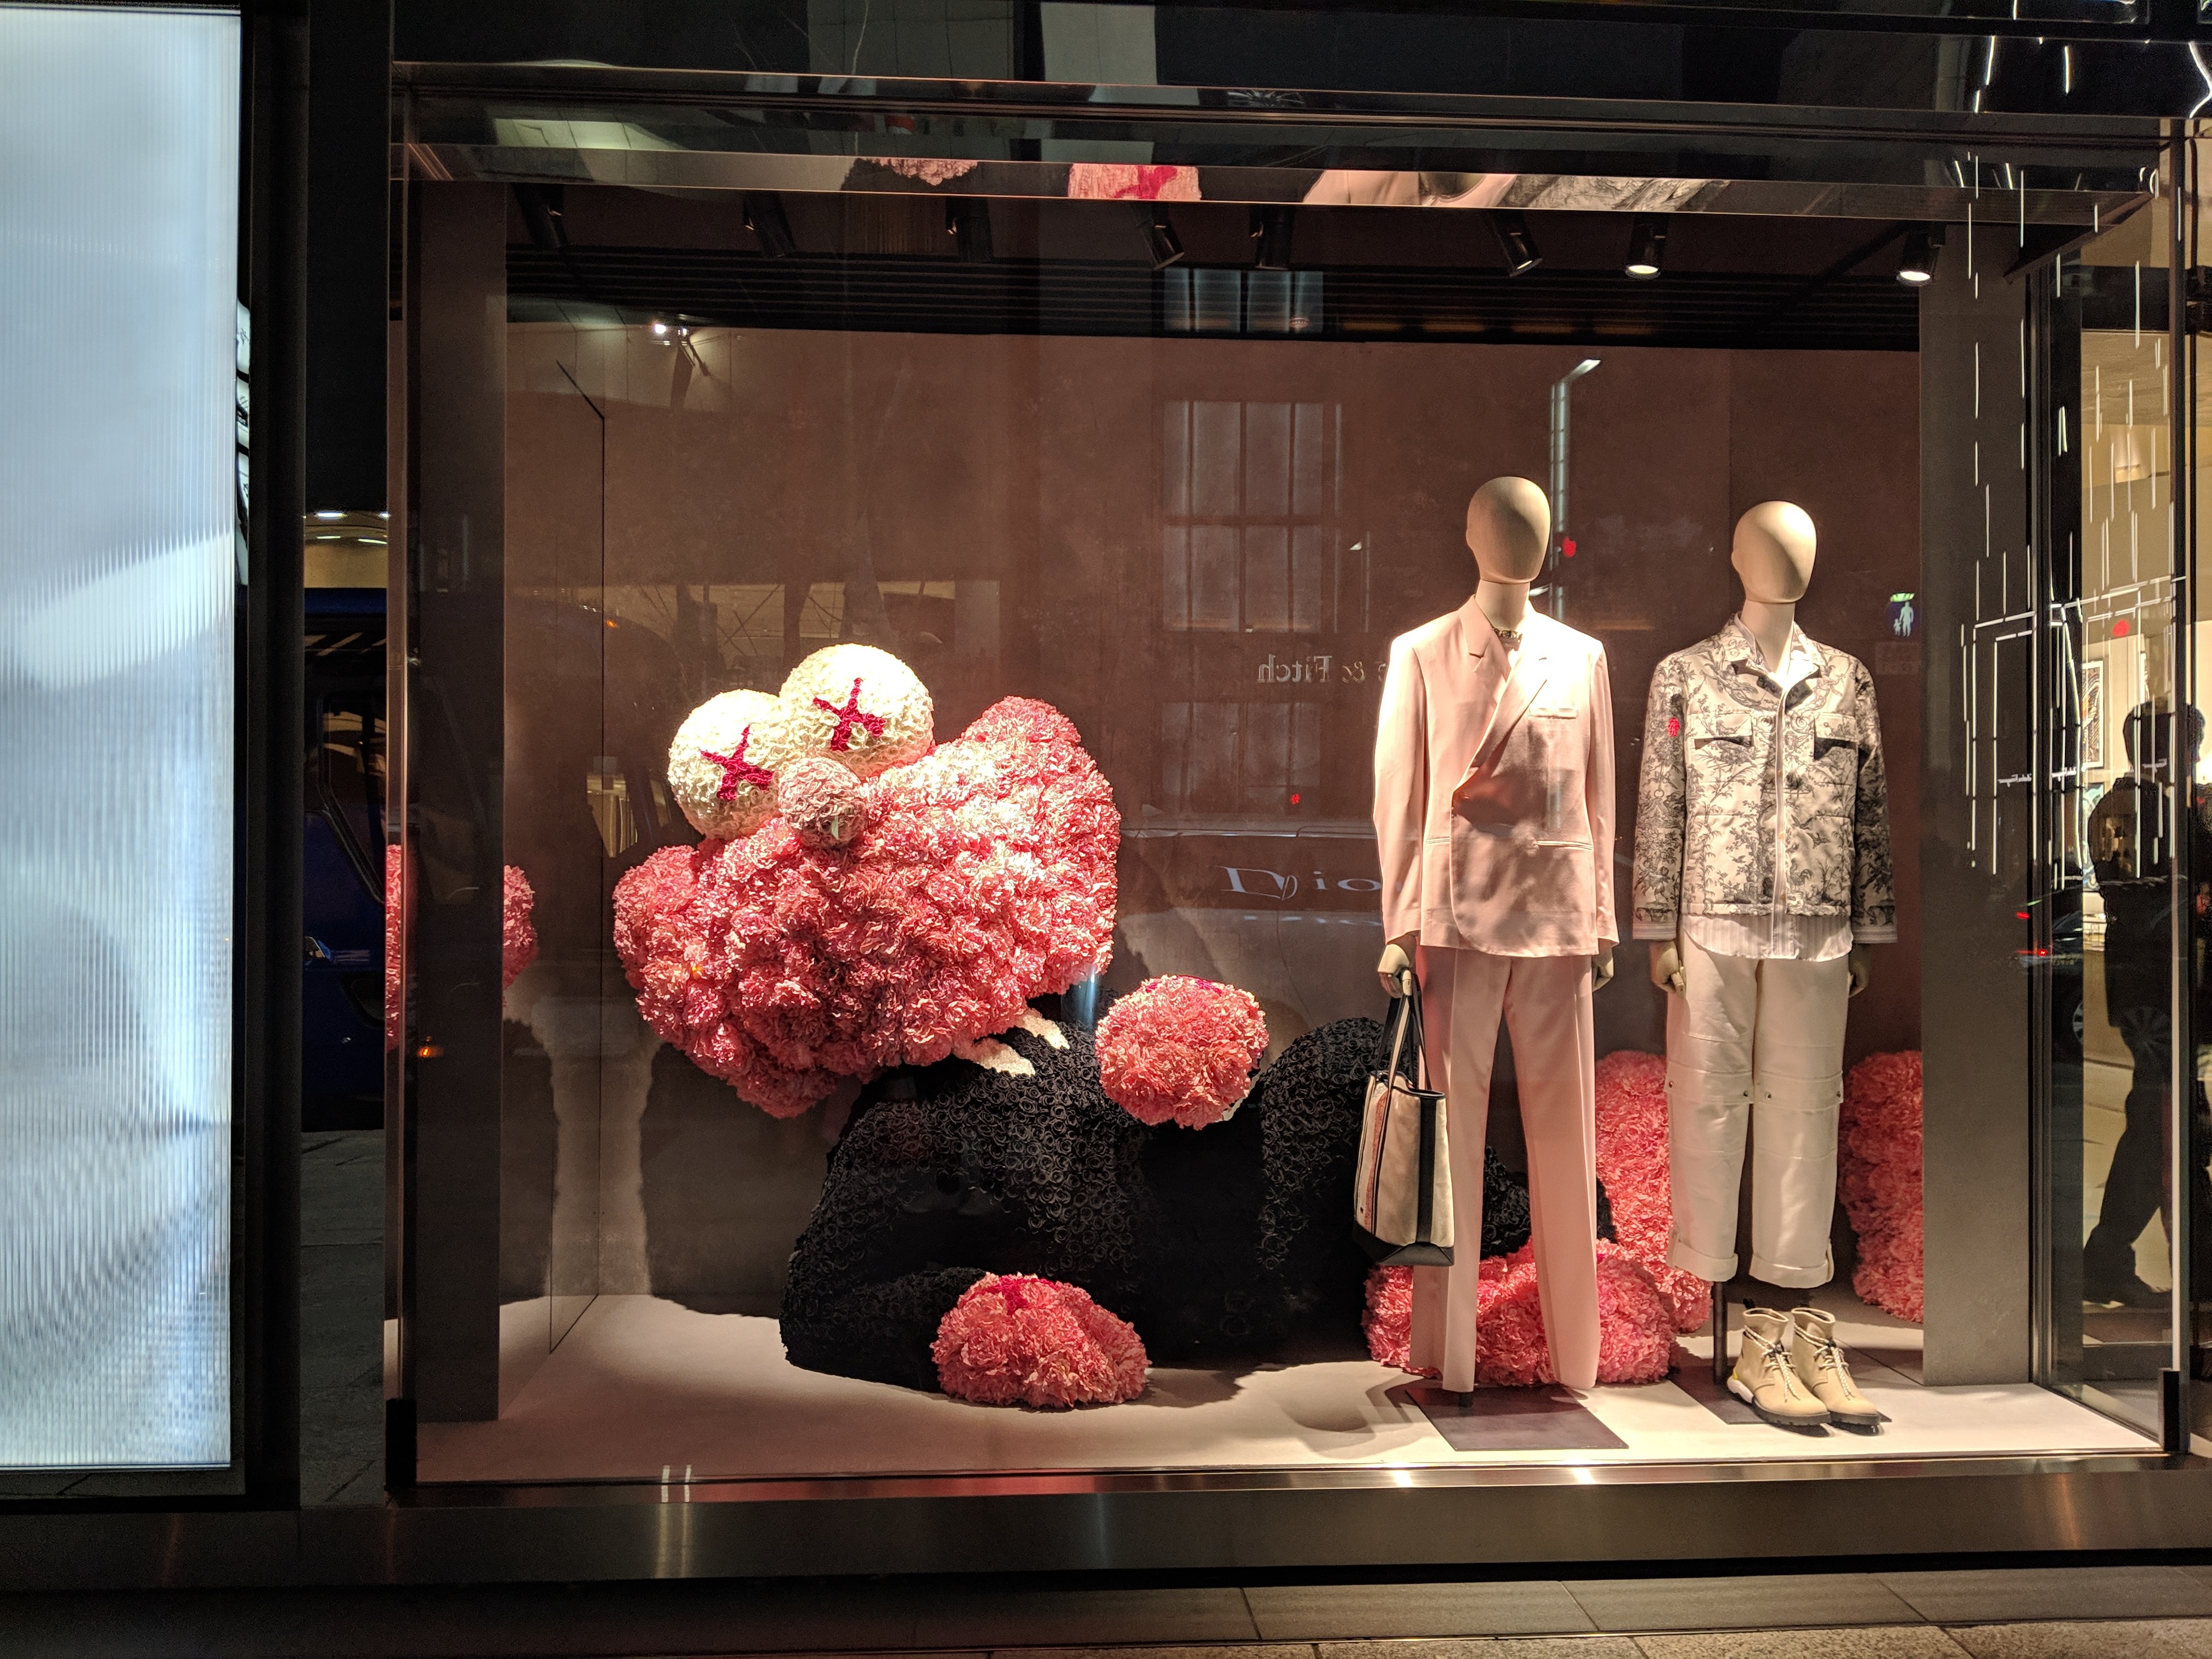 A KAWS art piece in a store window for... I think it was Fendi?